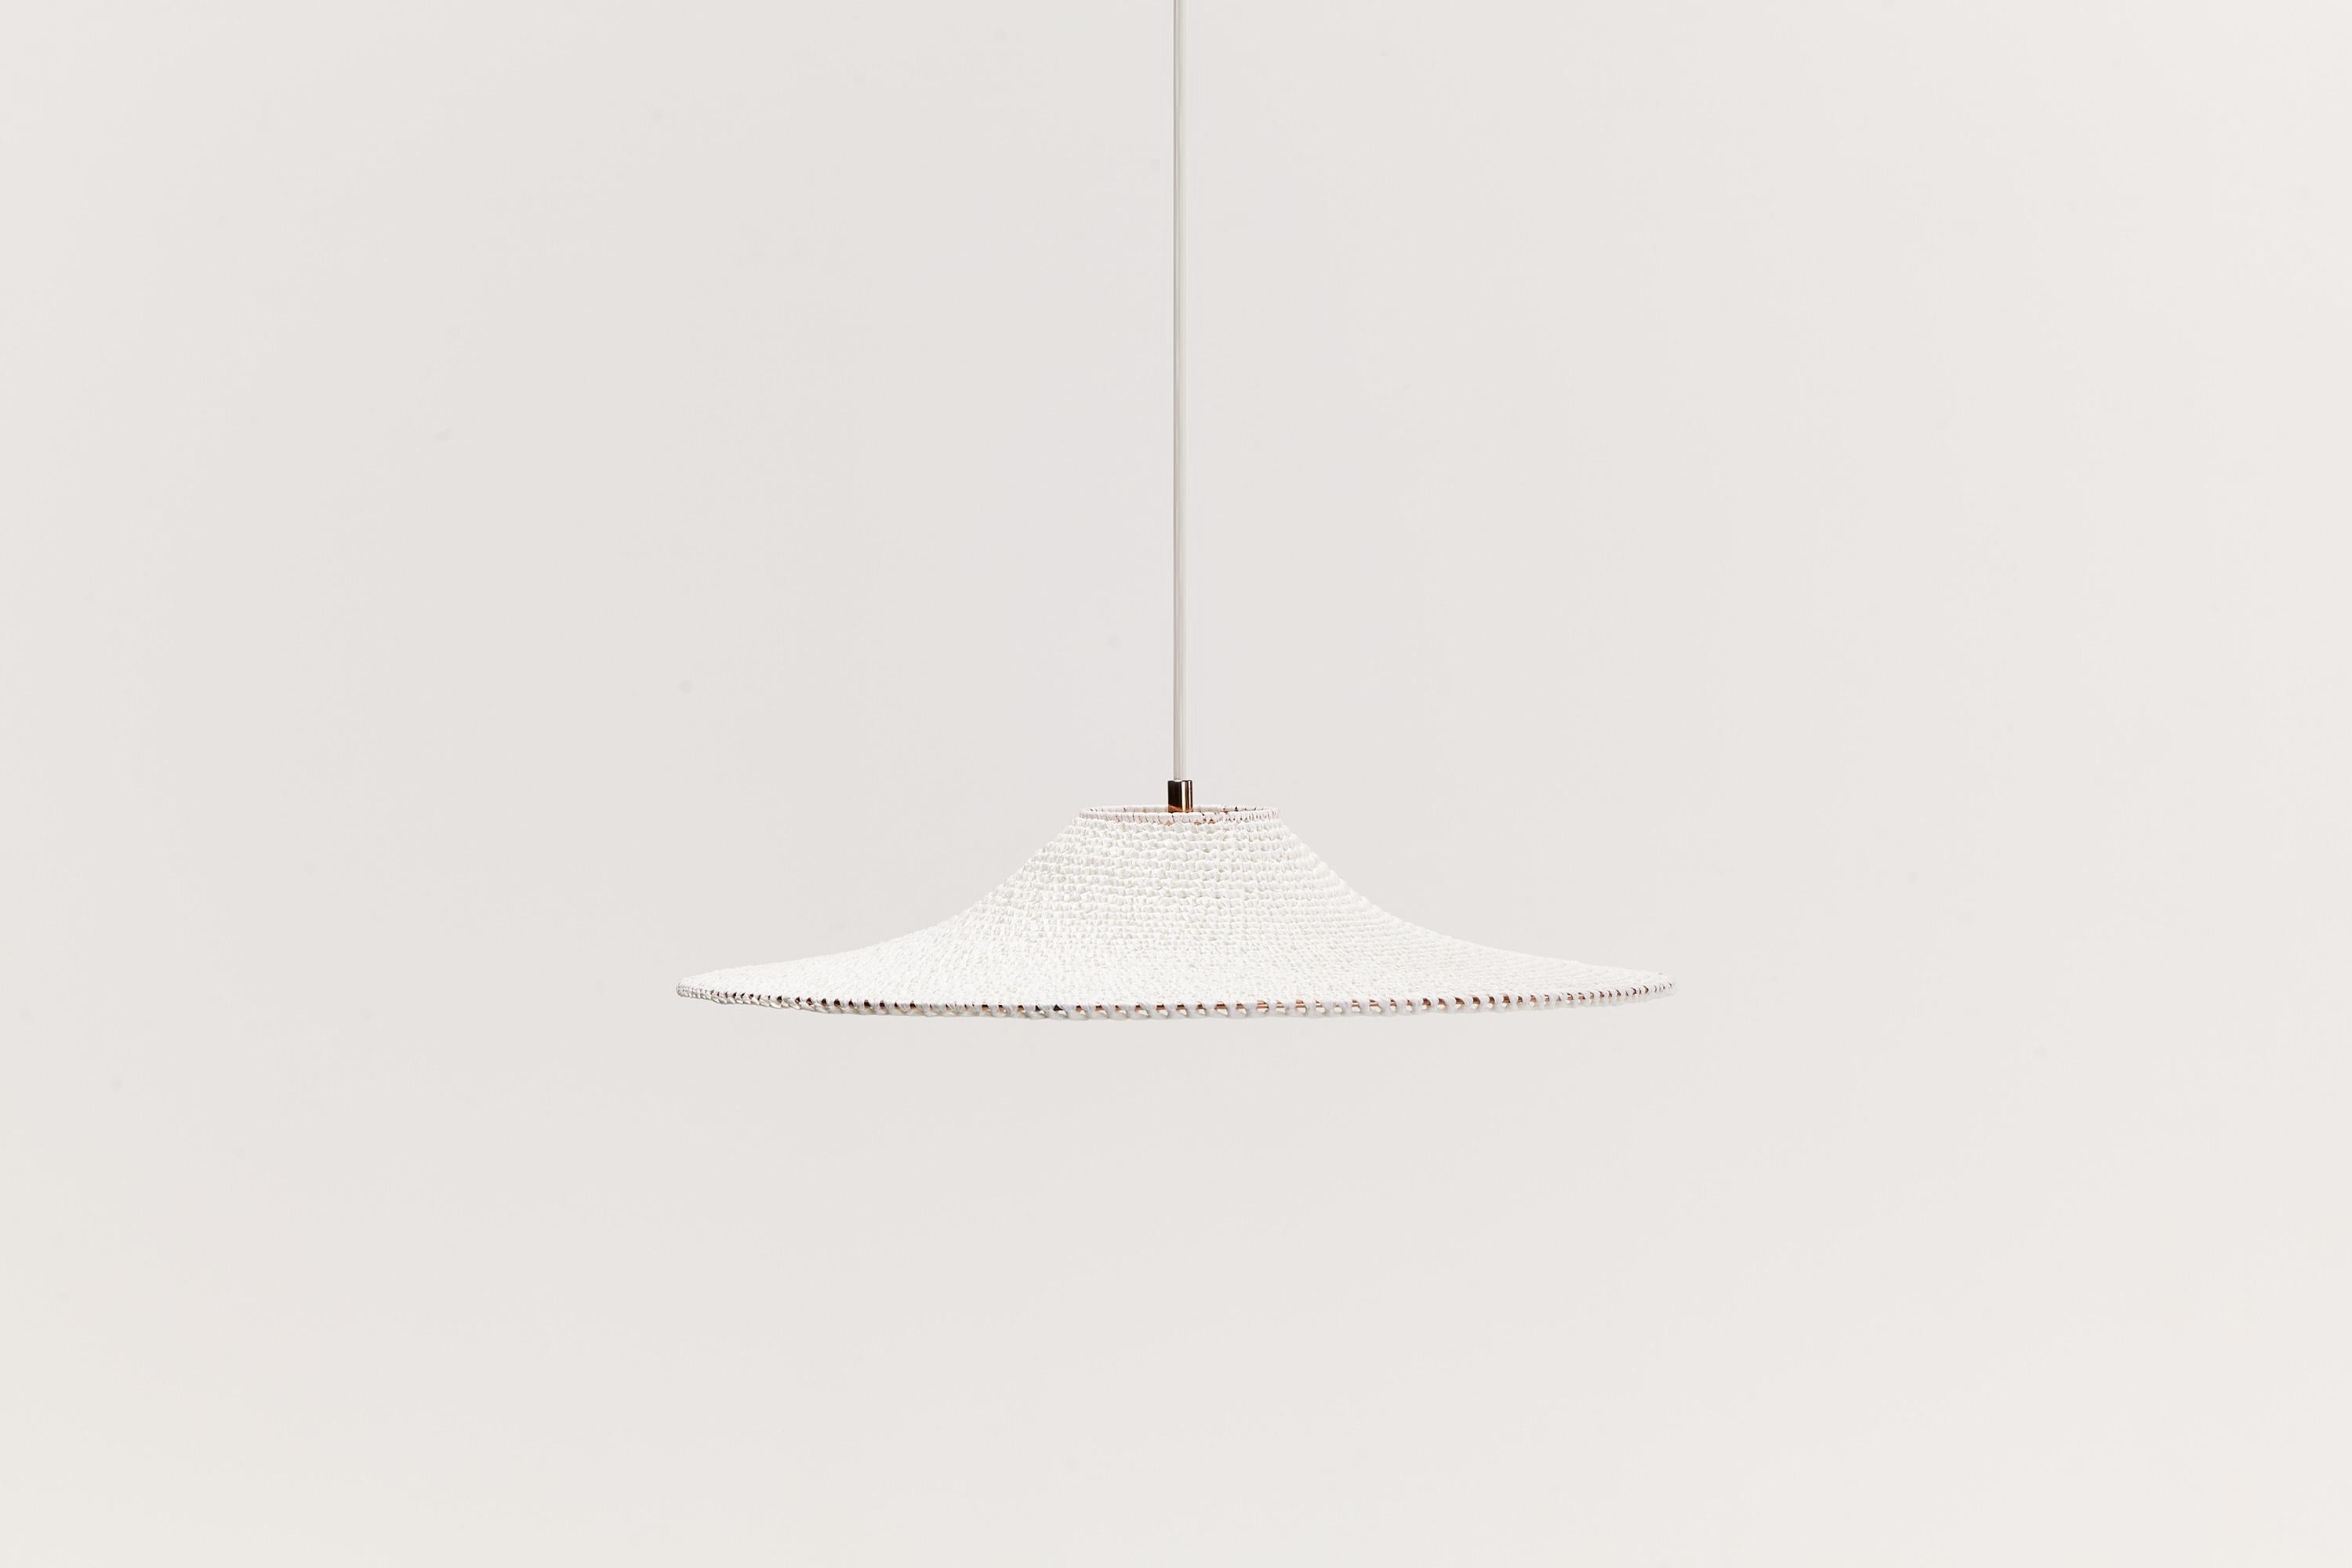 Small simple shade 01 bamboo pendant lamp by Naomi Paul
Dimensions: D 50 x H 8 cm
Materials: metal frame, Japanese bamboo paper yarn.
Available in other colors and in 3 sizes: D50, D60, D80 cm.
Available in plain, 50/50, trim or bamboo color